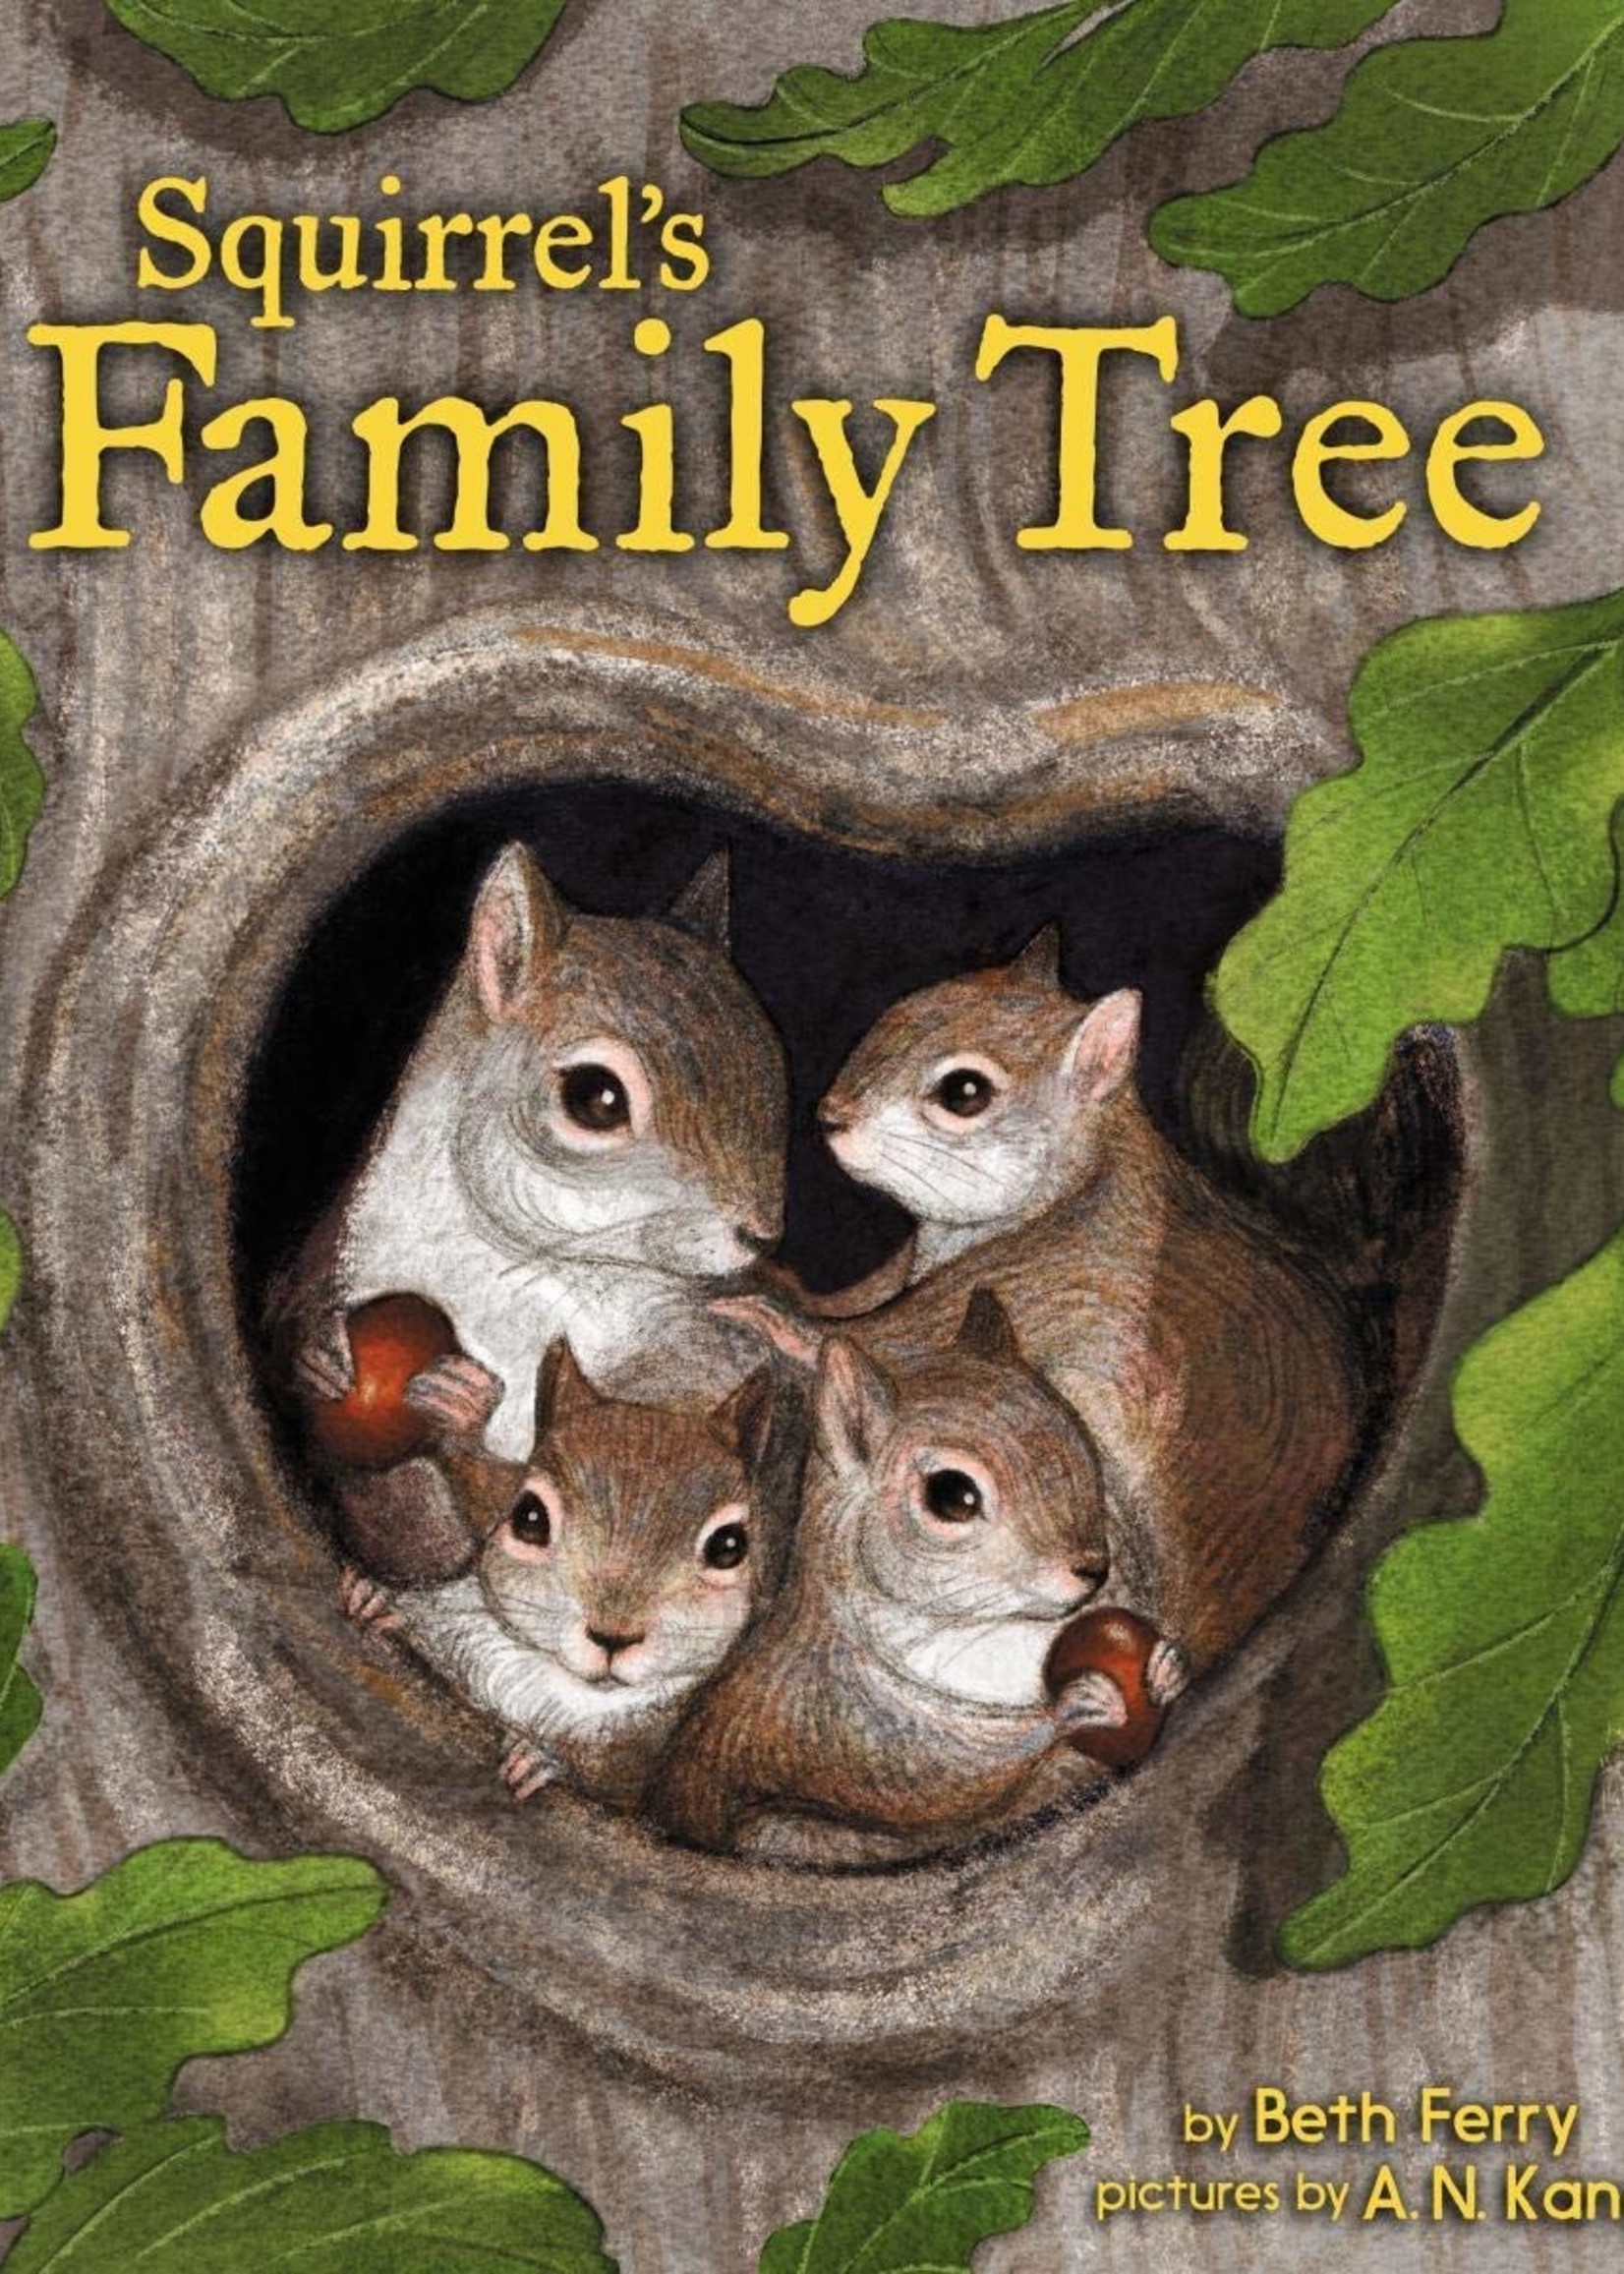 Squirrel's Family Tree - Hardcover